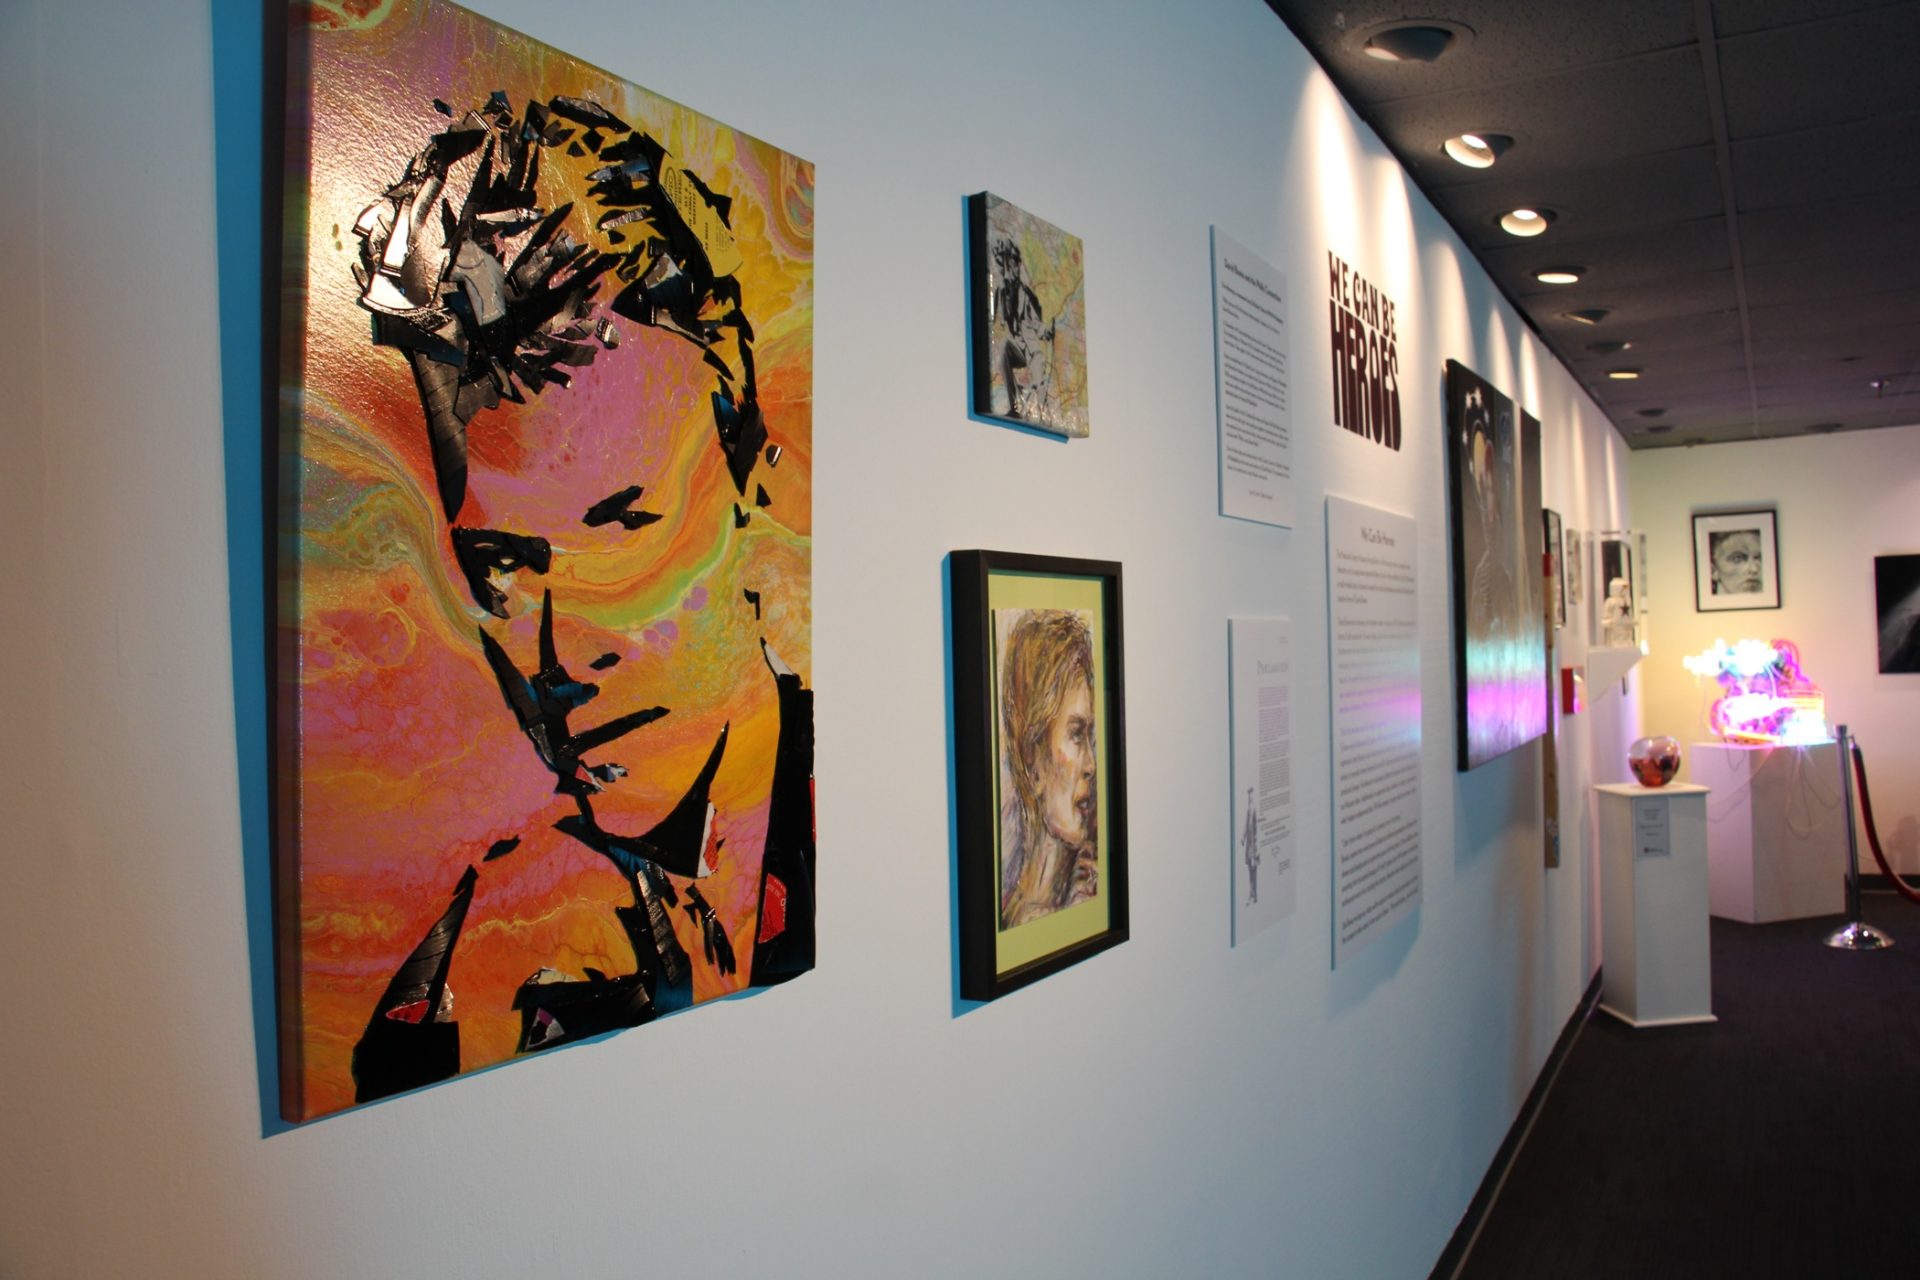 Bernard DelaCruz's 'Bowie On Vinyl,' hangs at the entrance to the We Can Be Heroes exhibit at the Liberty Museum.  The mixed media piece uses paint and fragments of vinyl records.